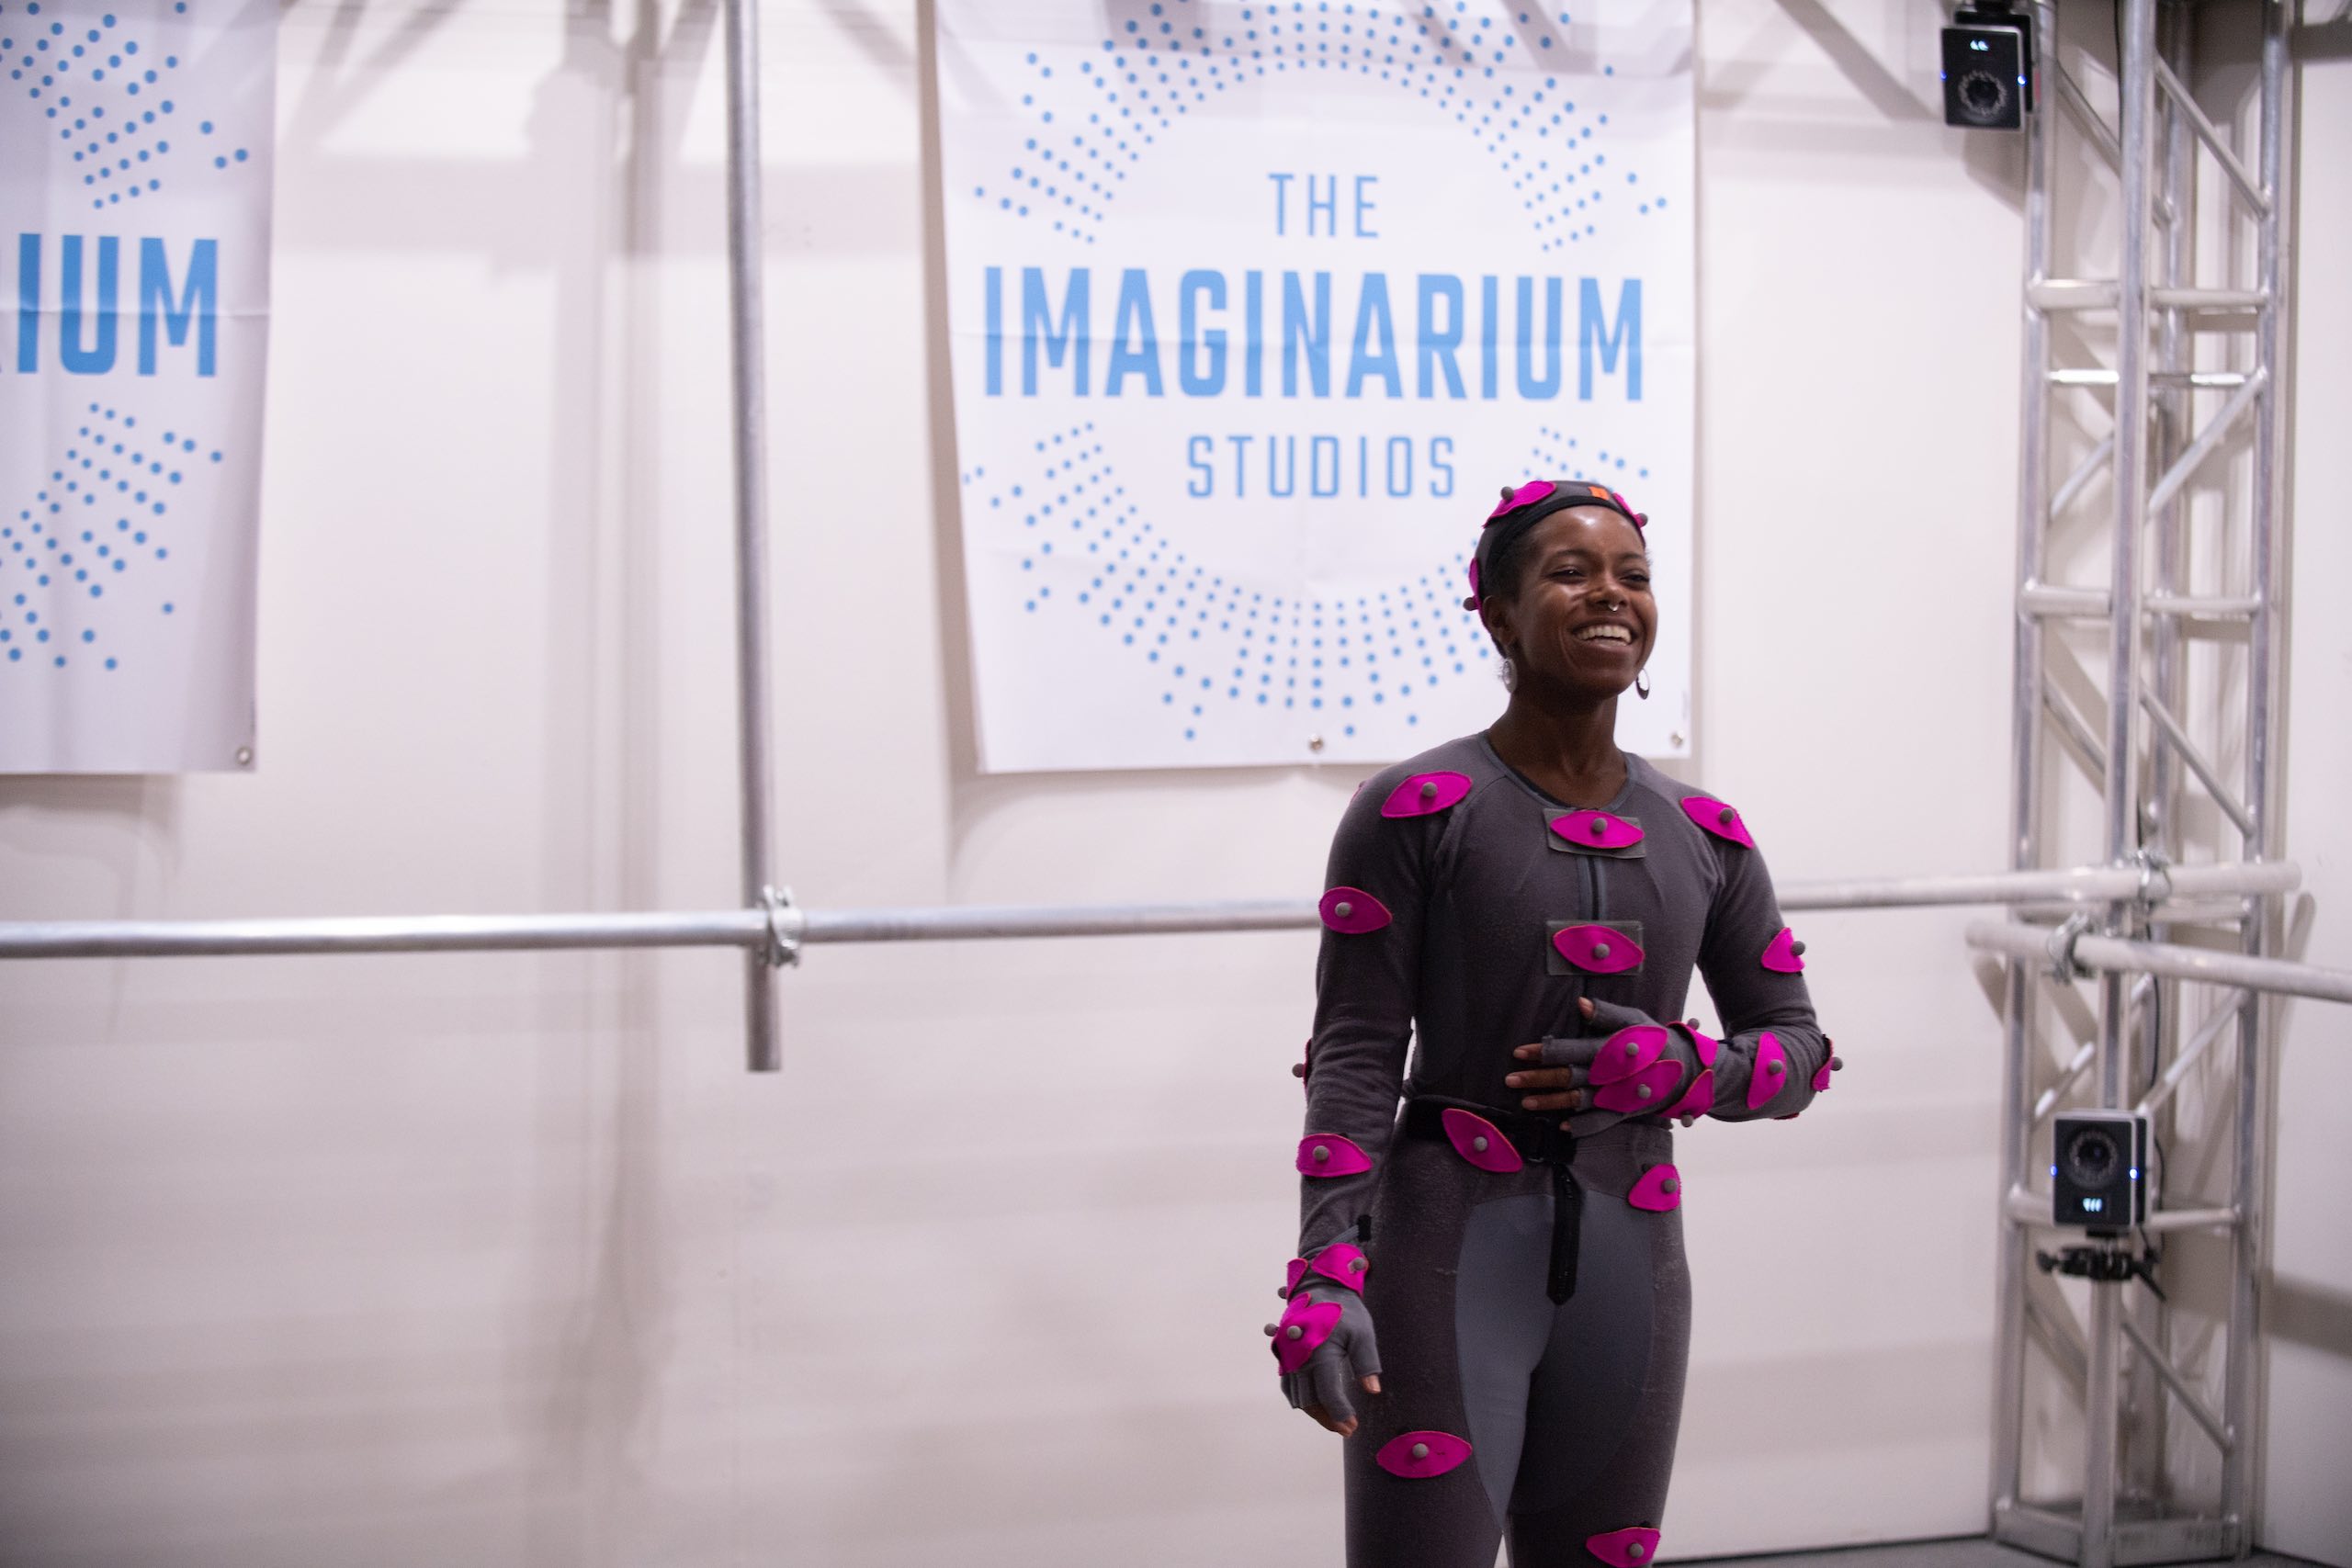 Woman with pink body movement sensors smiling in front of The Imaginarium Studios sign